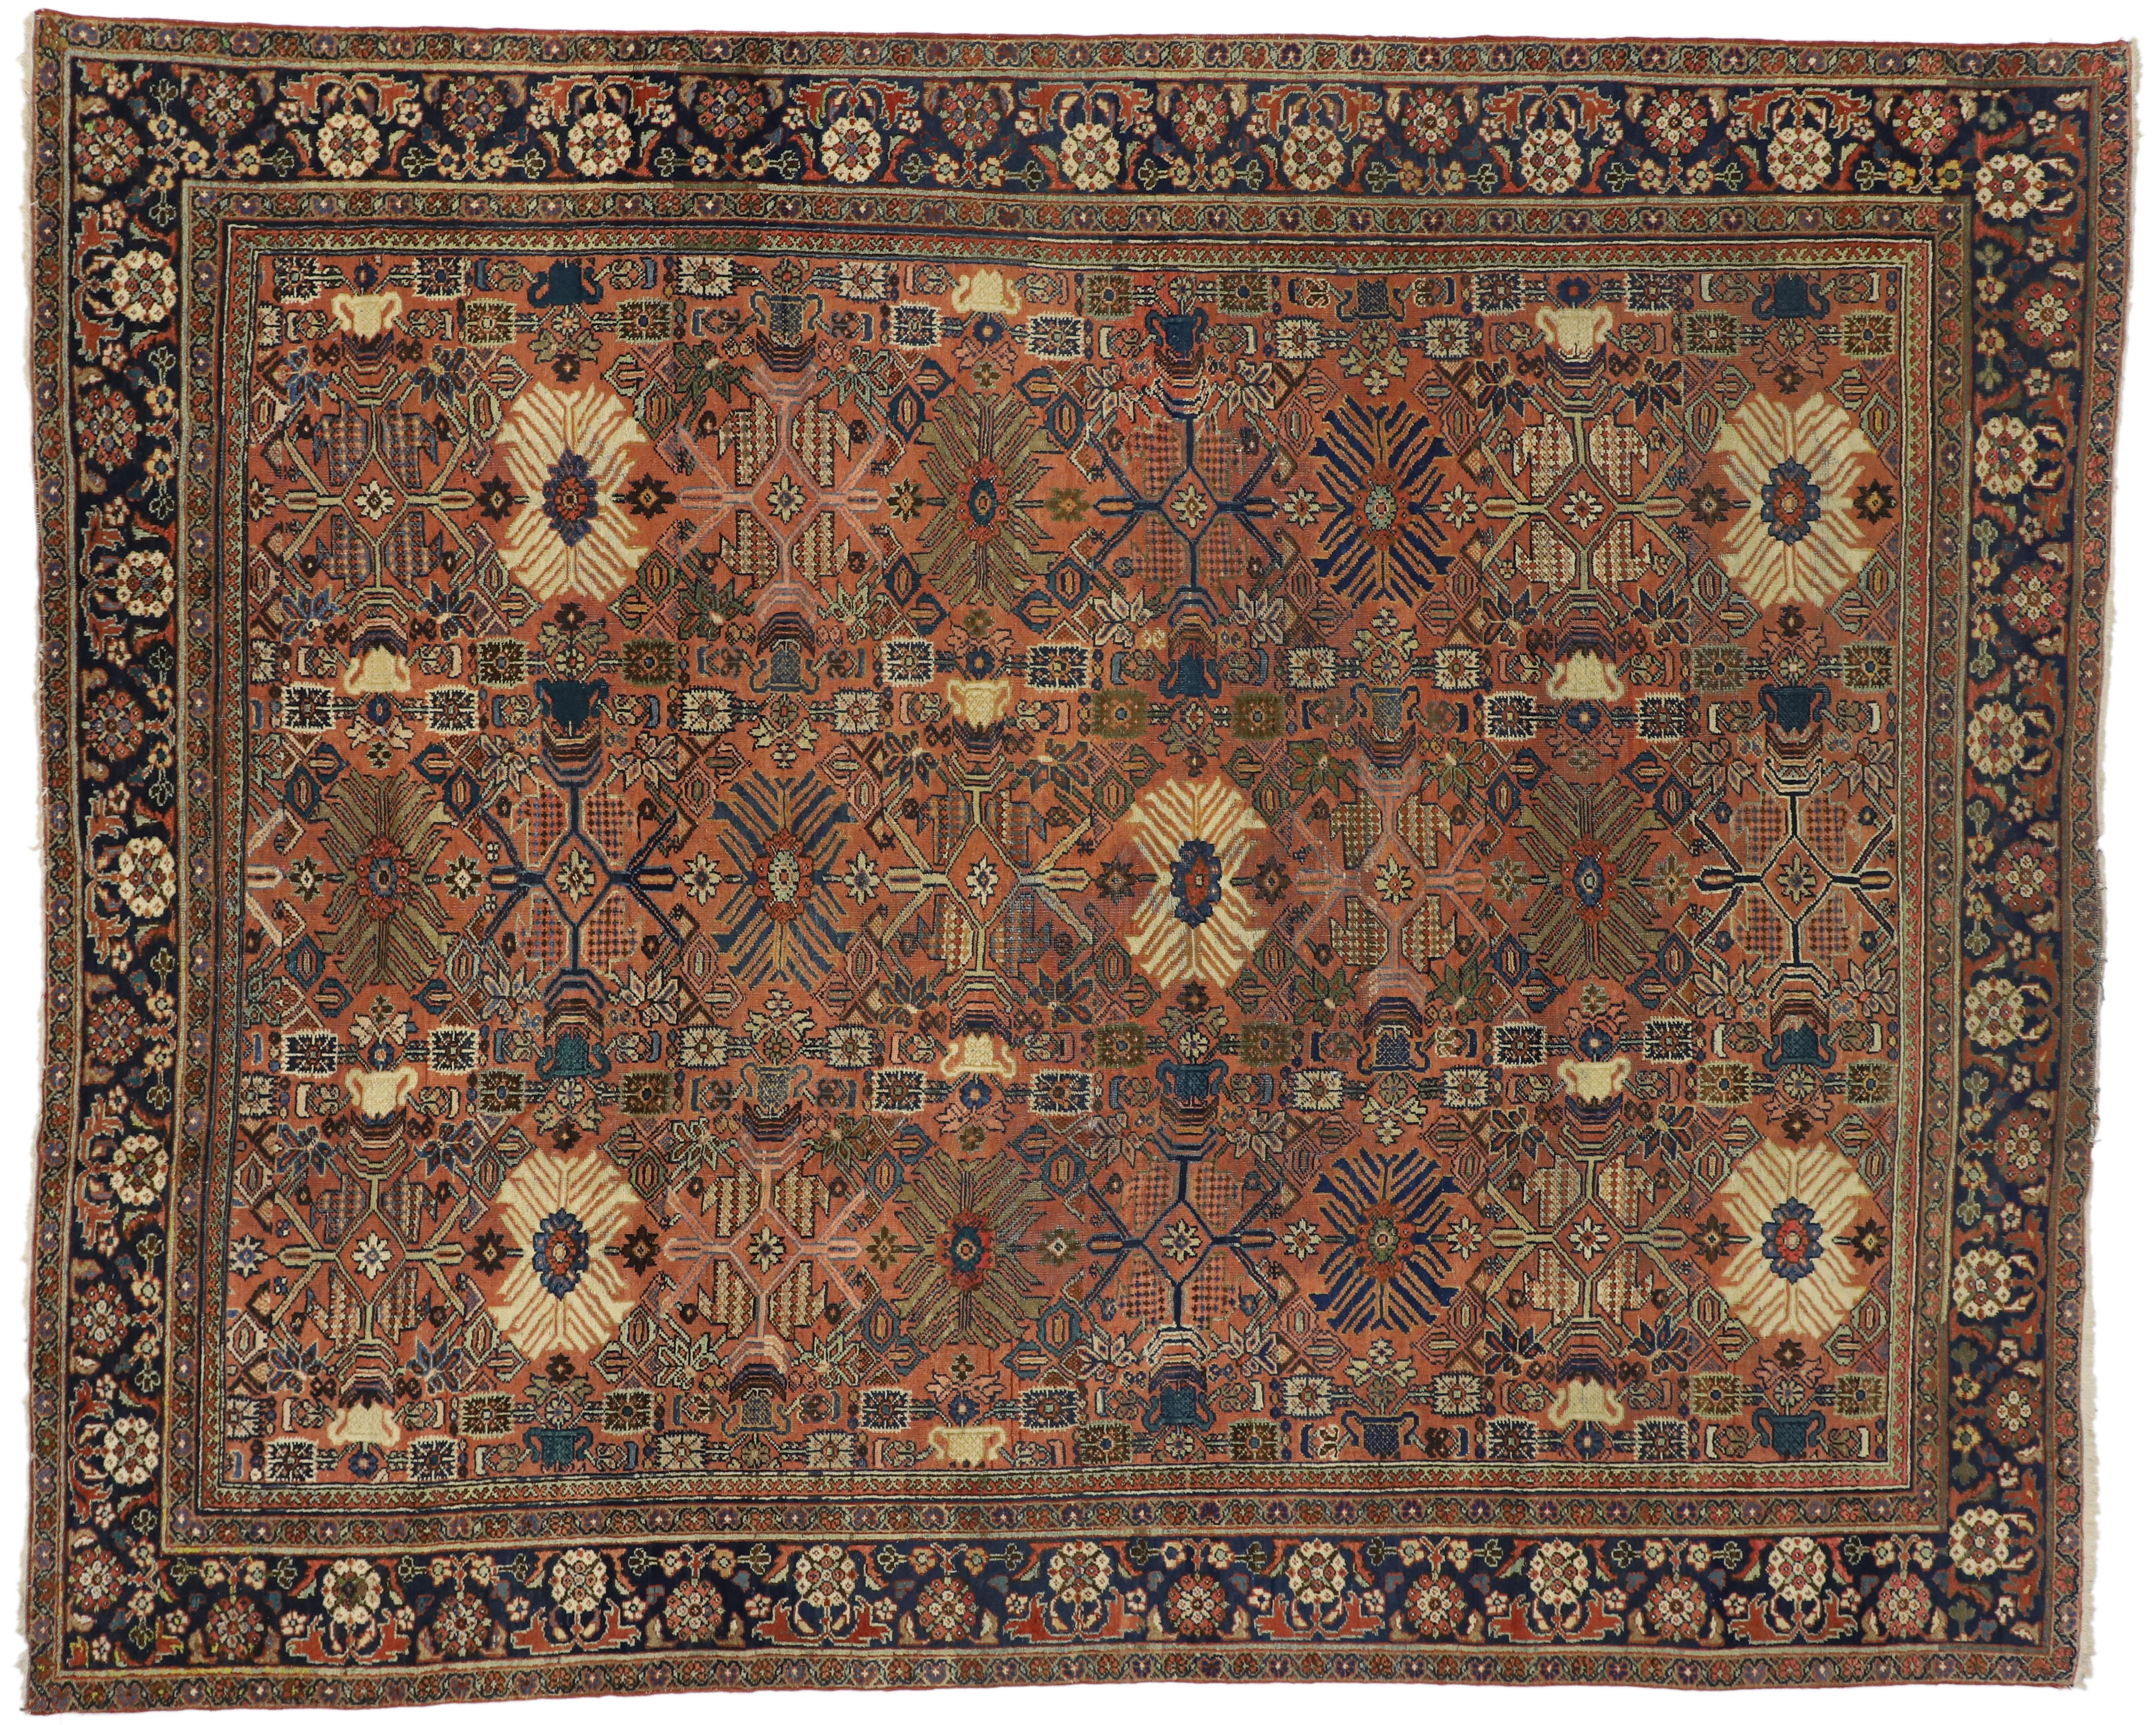 Antique Persian Mahal Rug with Rustic Arts and Crafts Style 3